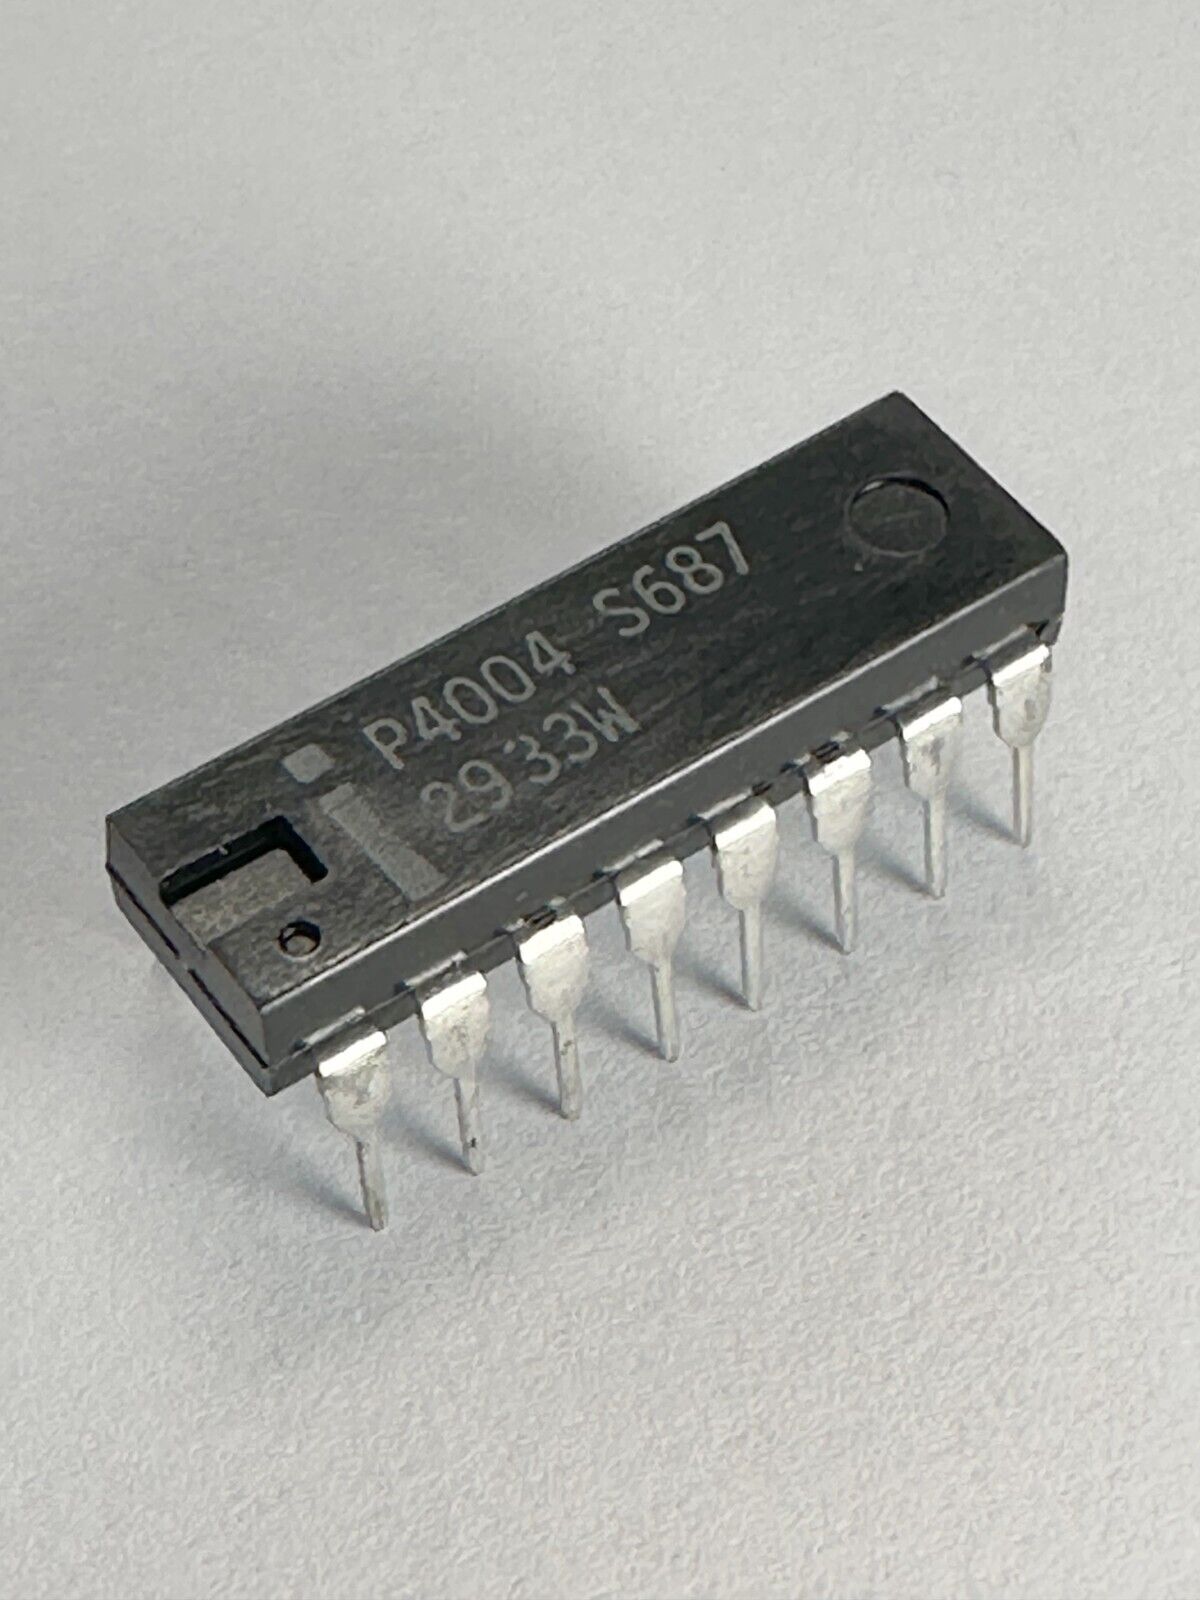 Intel 4004  - The First Microprocessor - NOS,P4004,1980,8006,Philippines,Tested